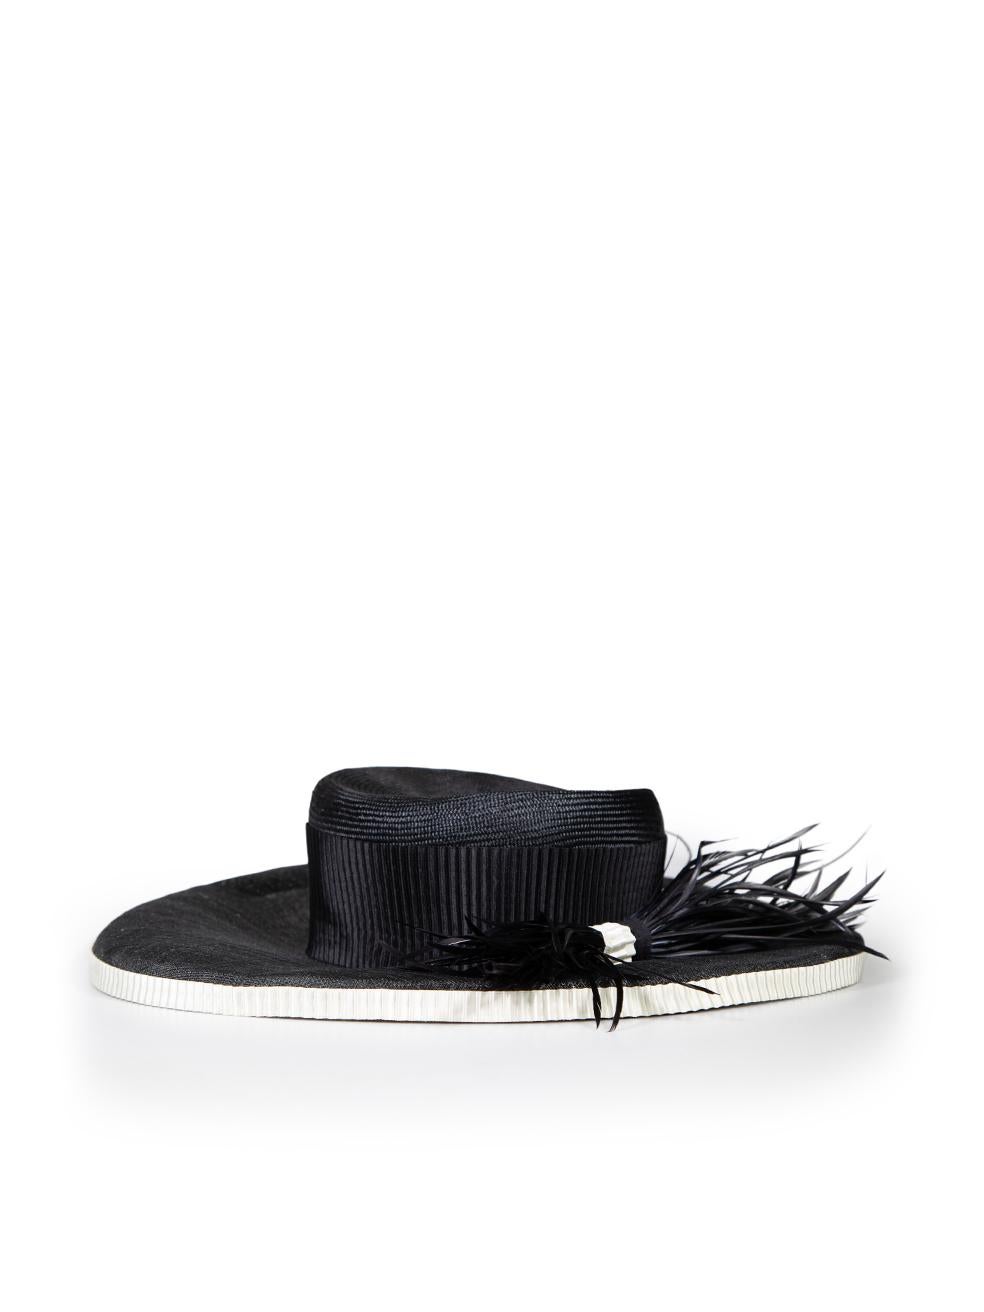 CONDITION is Very good. Minimal wear to hat is evident. Minimal discolouration on the label on this used Harrods designer resale item.
 
 
 
 Details
 
 
 Vintage
 
 Black
 
 Synthetic
 
 Sun hat
 
 Feather detail
 
 White ribbon trim
 
 
 
 
 
